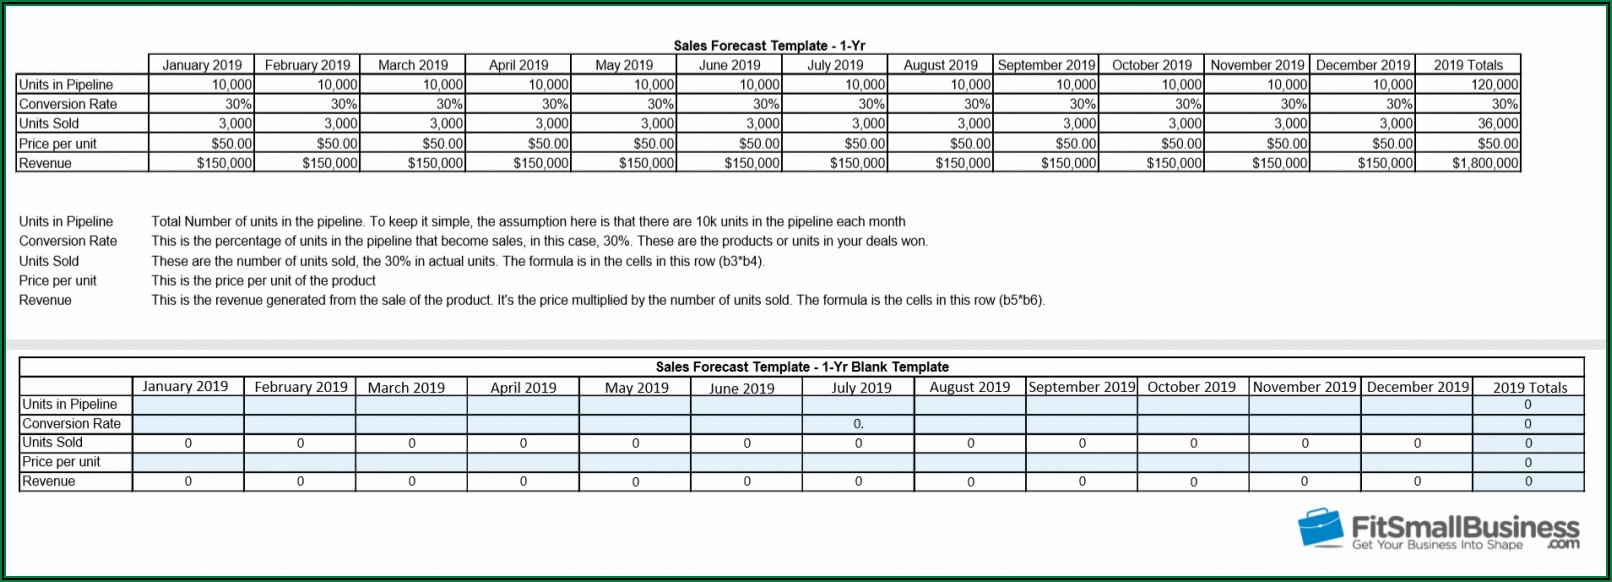 1 Year Sales Forecast Template